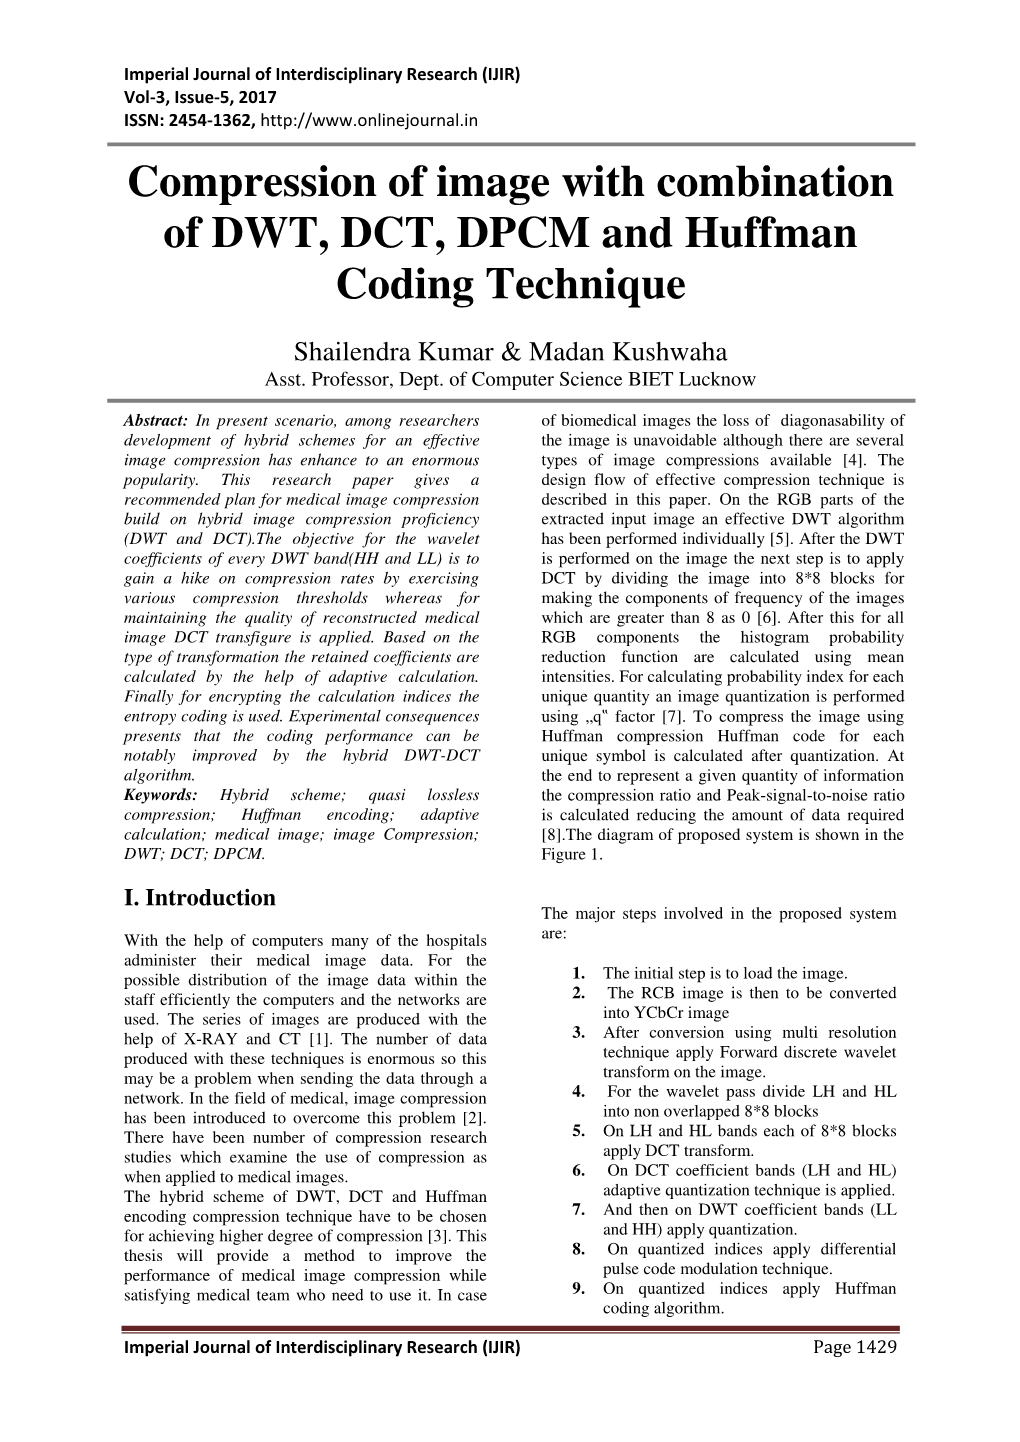 Compression of Image with Combination of DWT, DCT, DPCM and Huffman Coding Technique